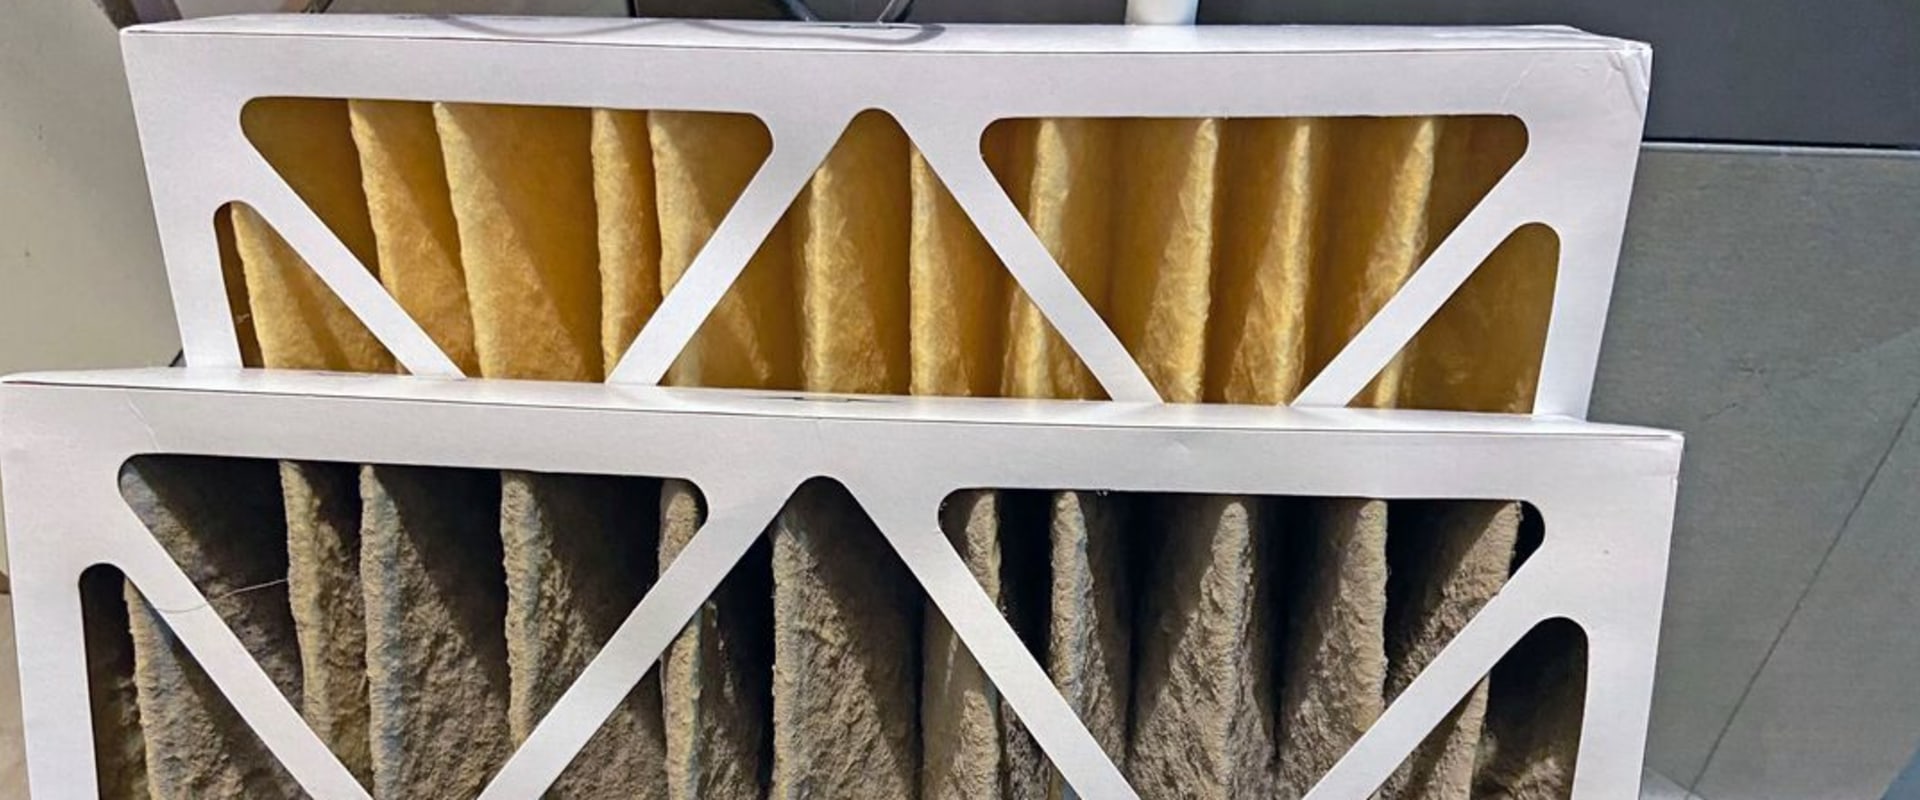 Does the Size of an Oven Filter Really Make a Difference?